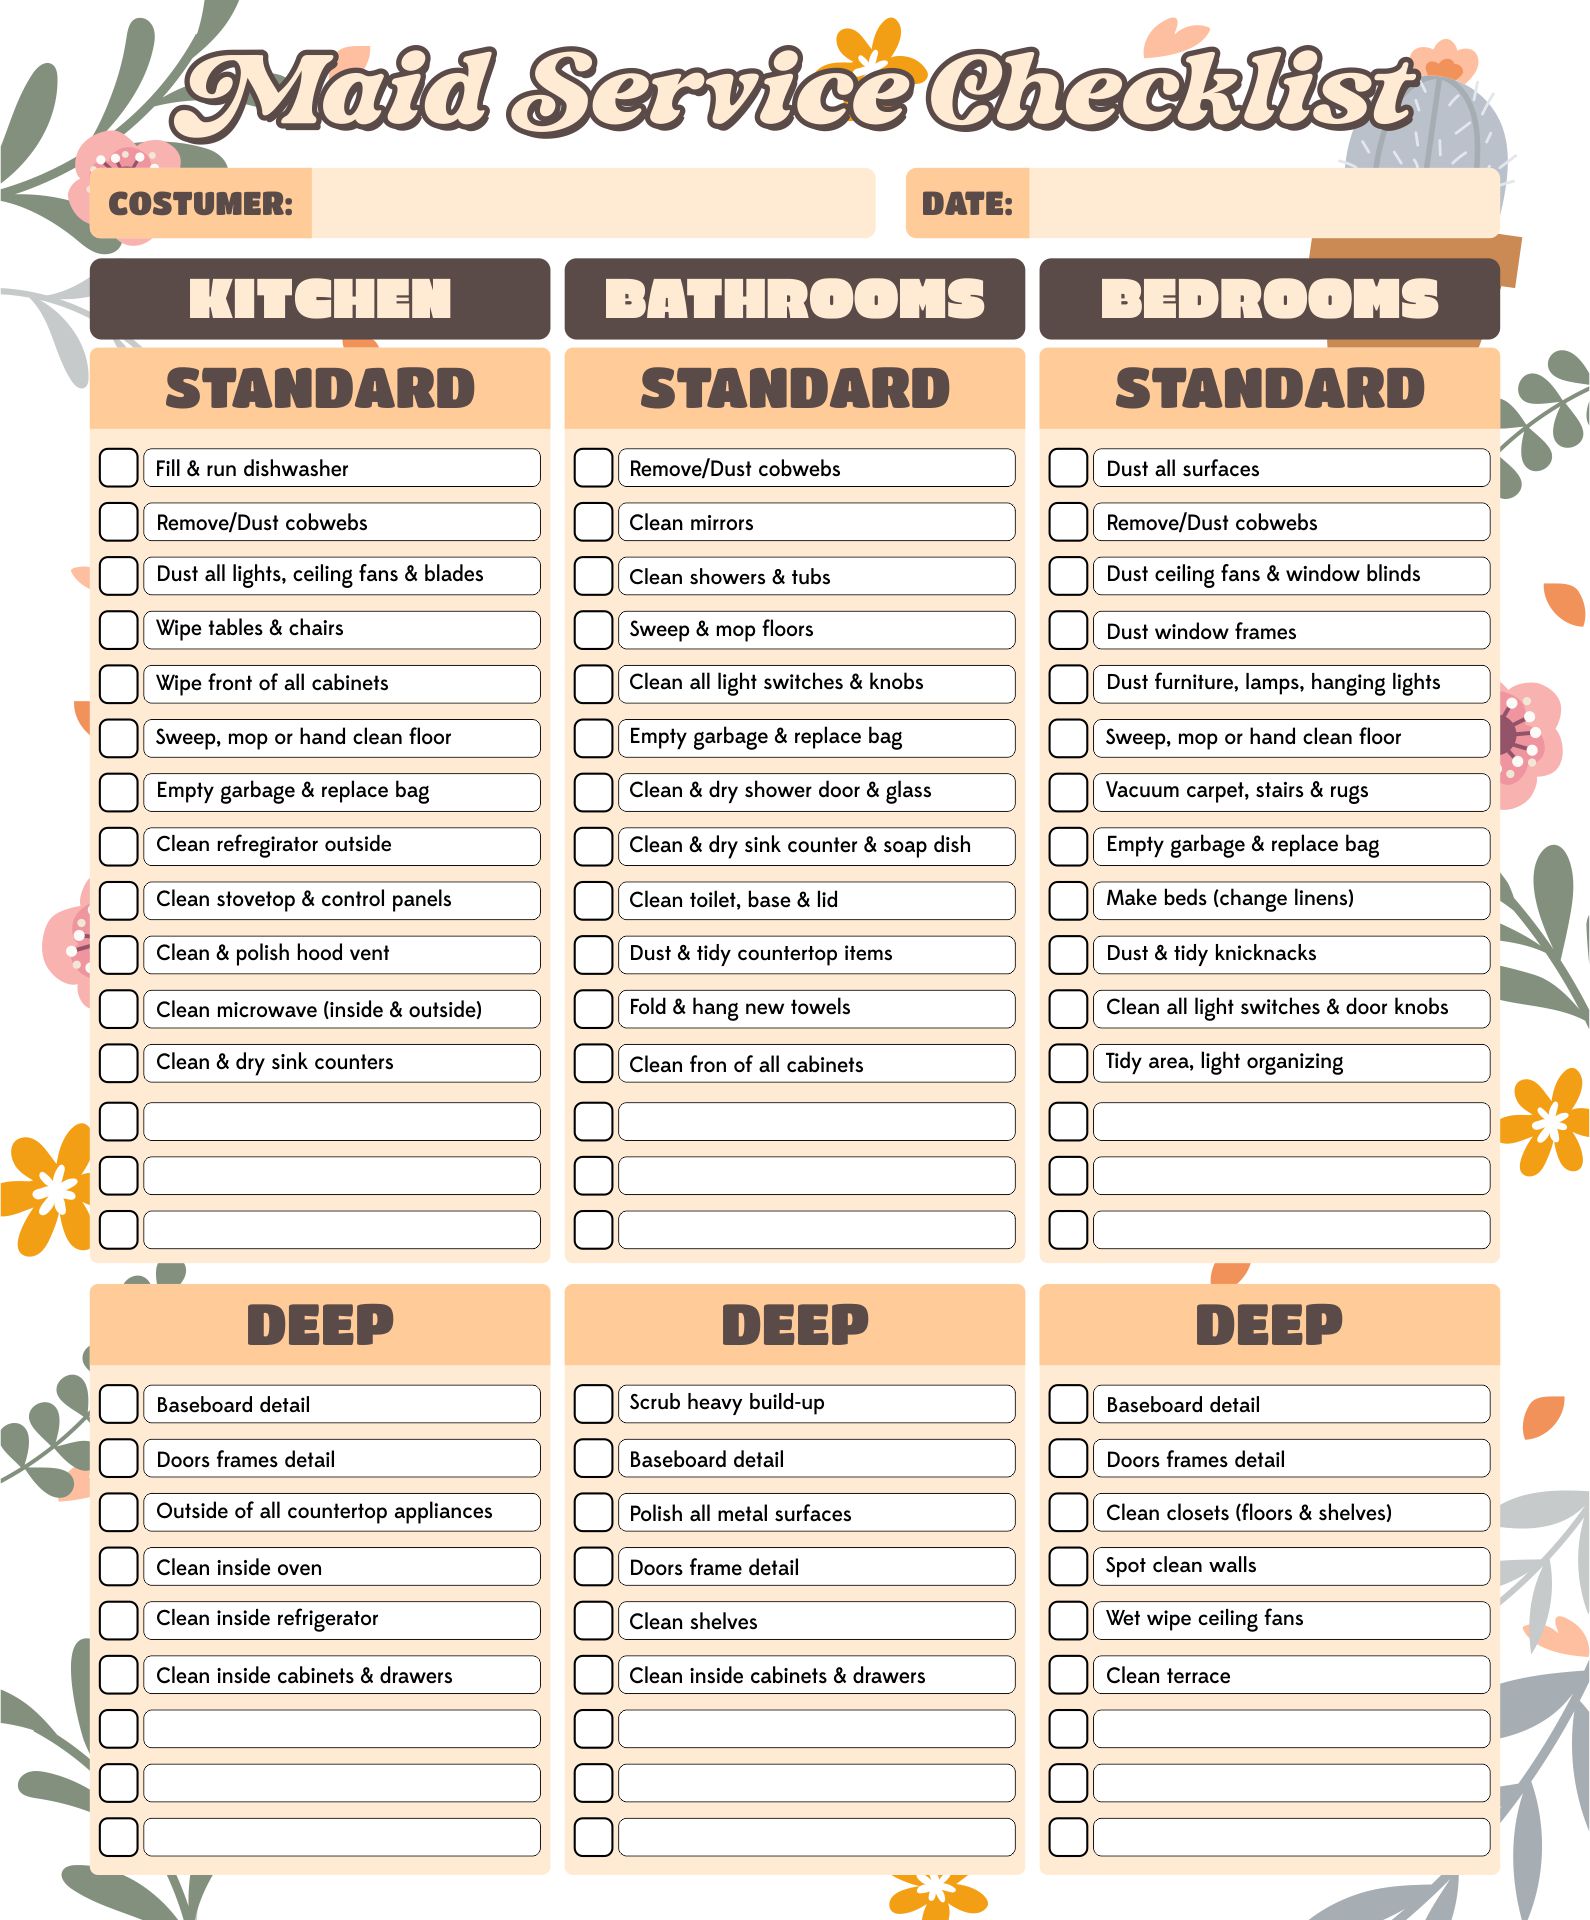 9-best-images-of-maid-service-checklist-printable-house-cleaning